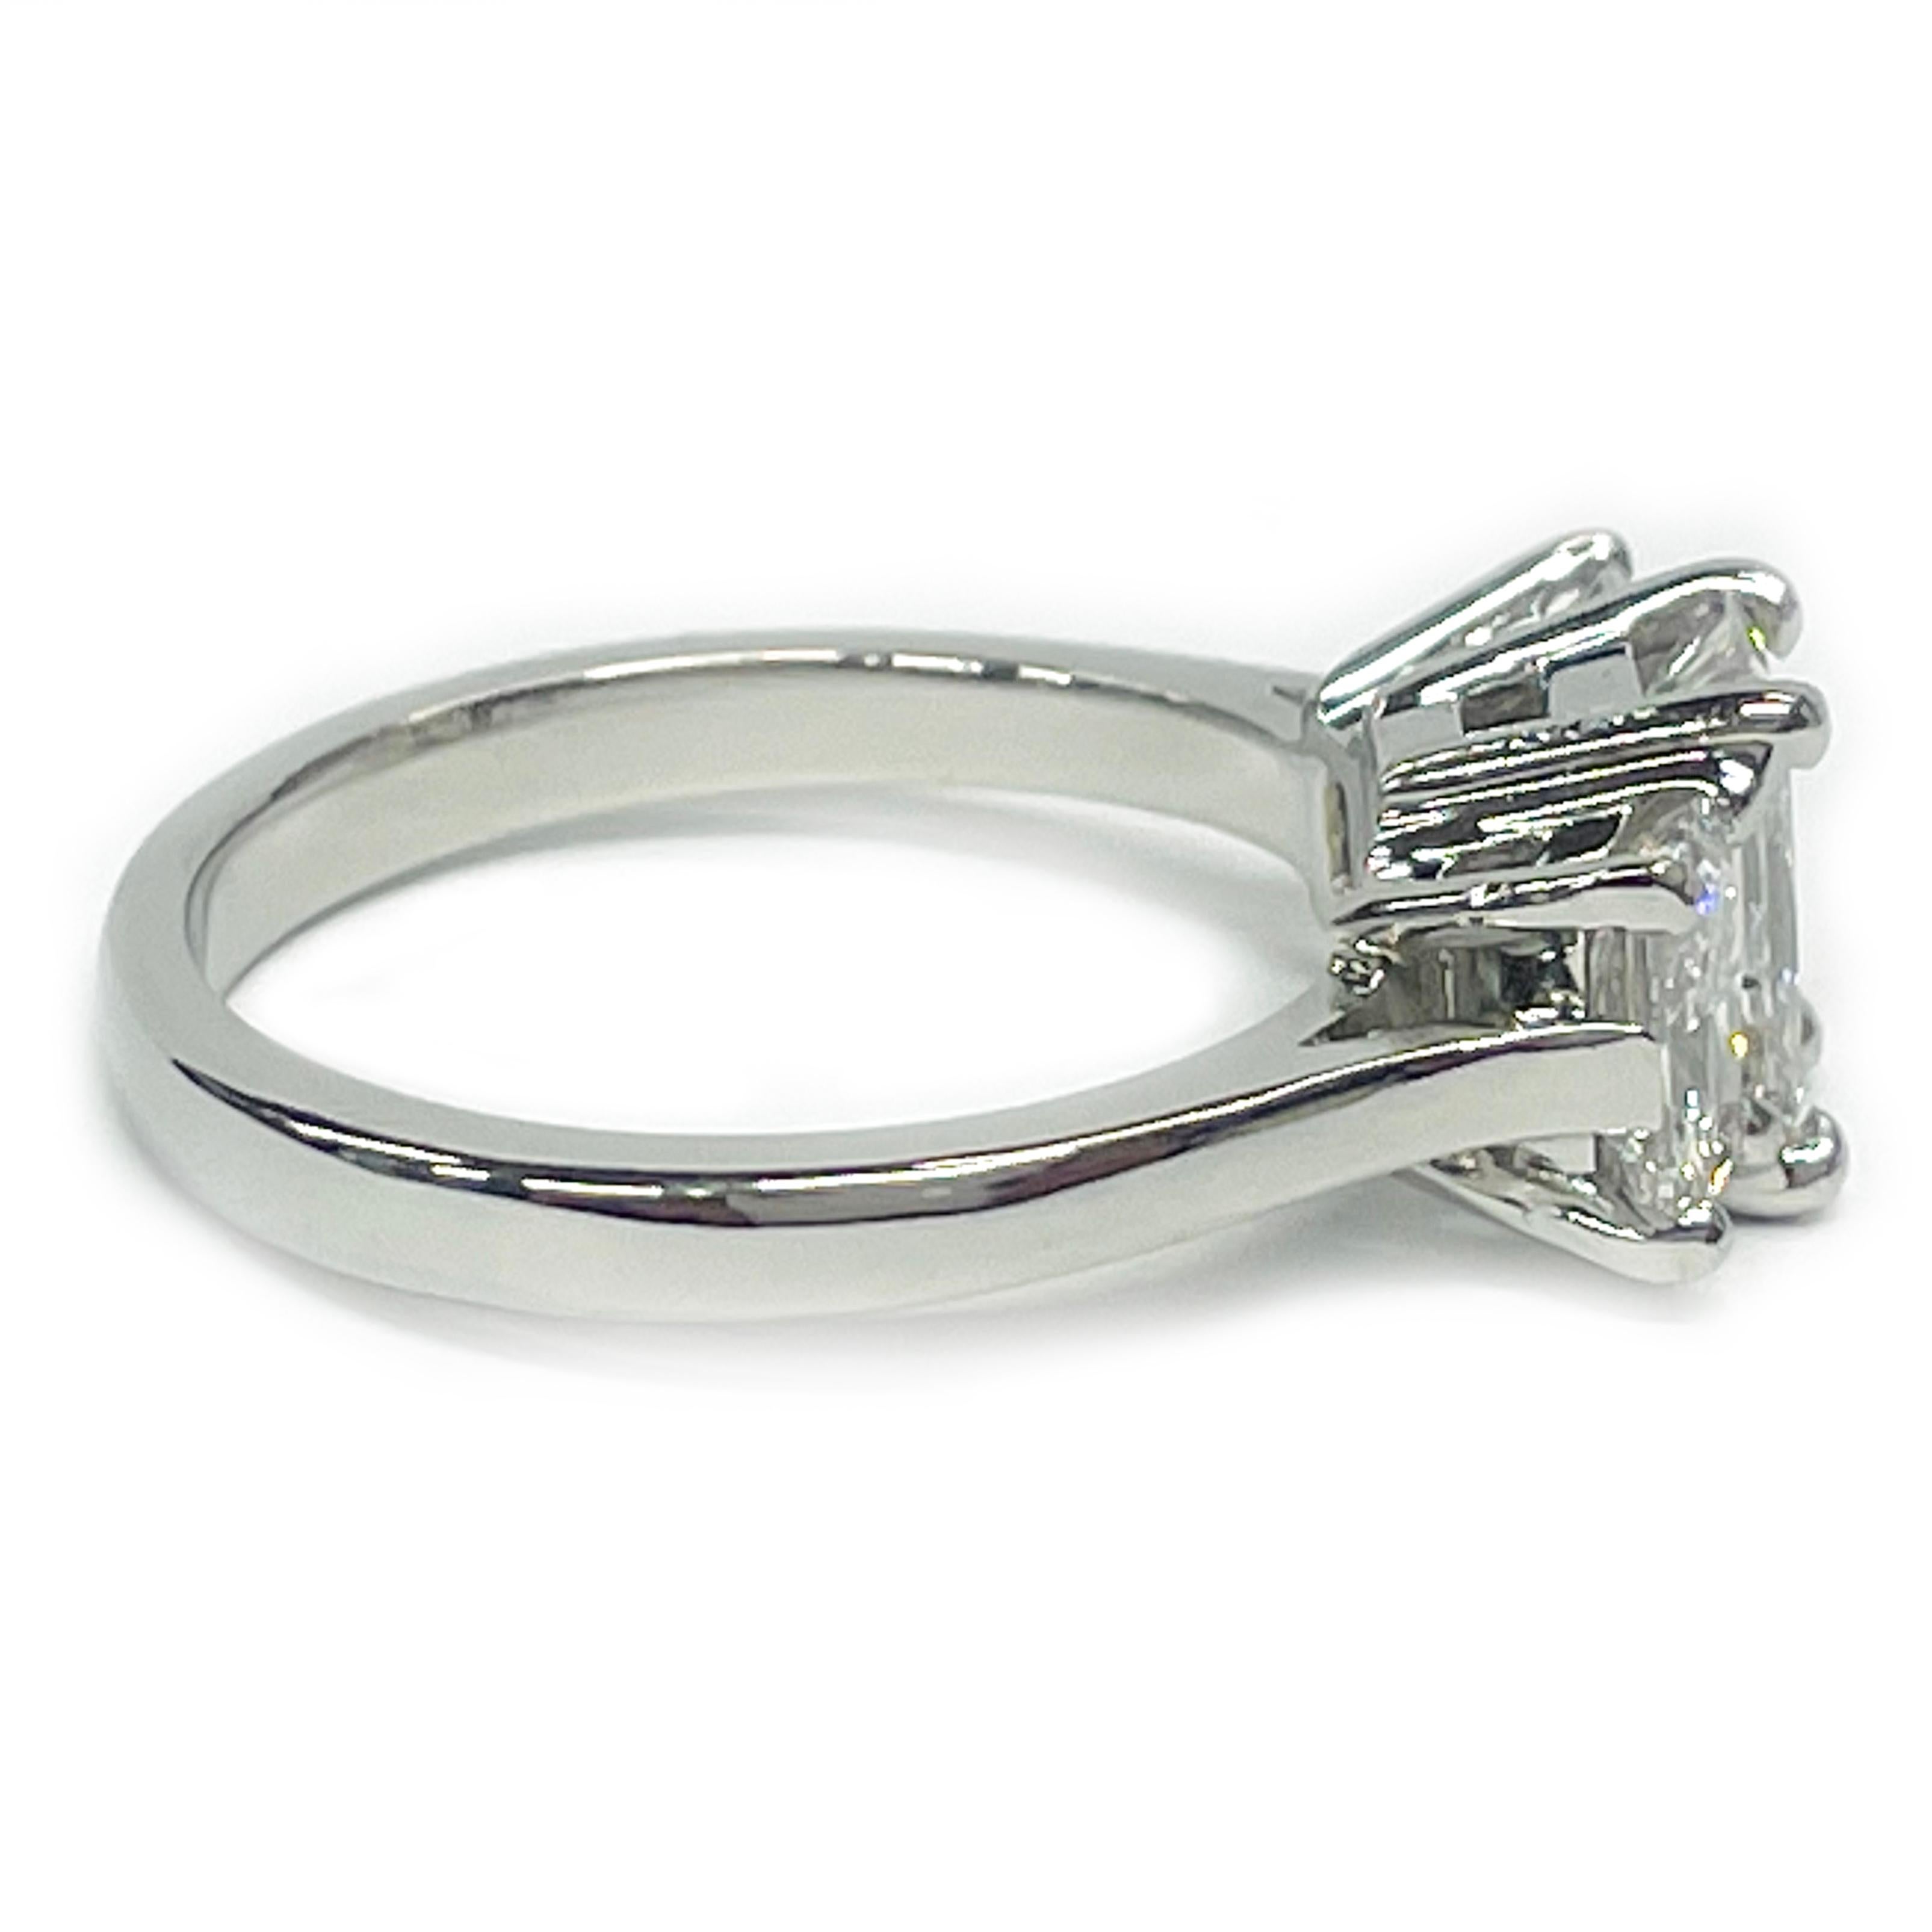 Platinum Three Diamond Ring, 1.92ctw. Simple and elegant three diamond ring design. All three diamonds are modified radiant-cut and set in four prong basket settings. The center diamond is larger measuring 7.45 x 4.91 x 3.47mm with a carat weight of